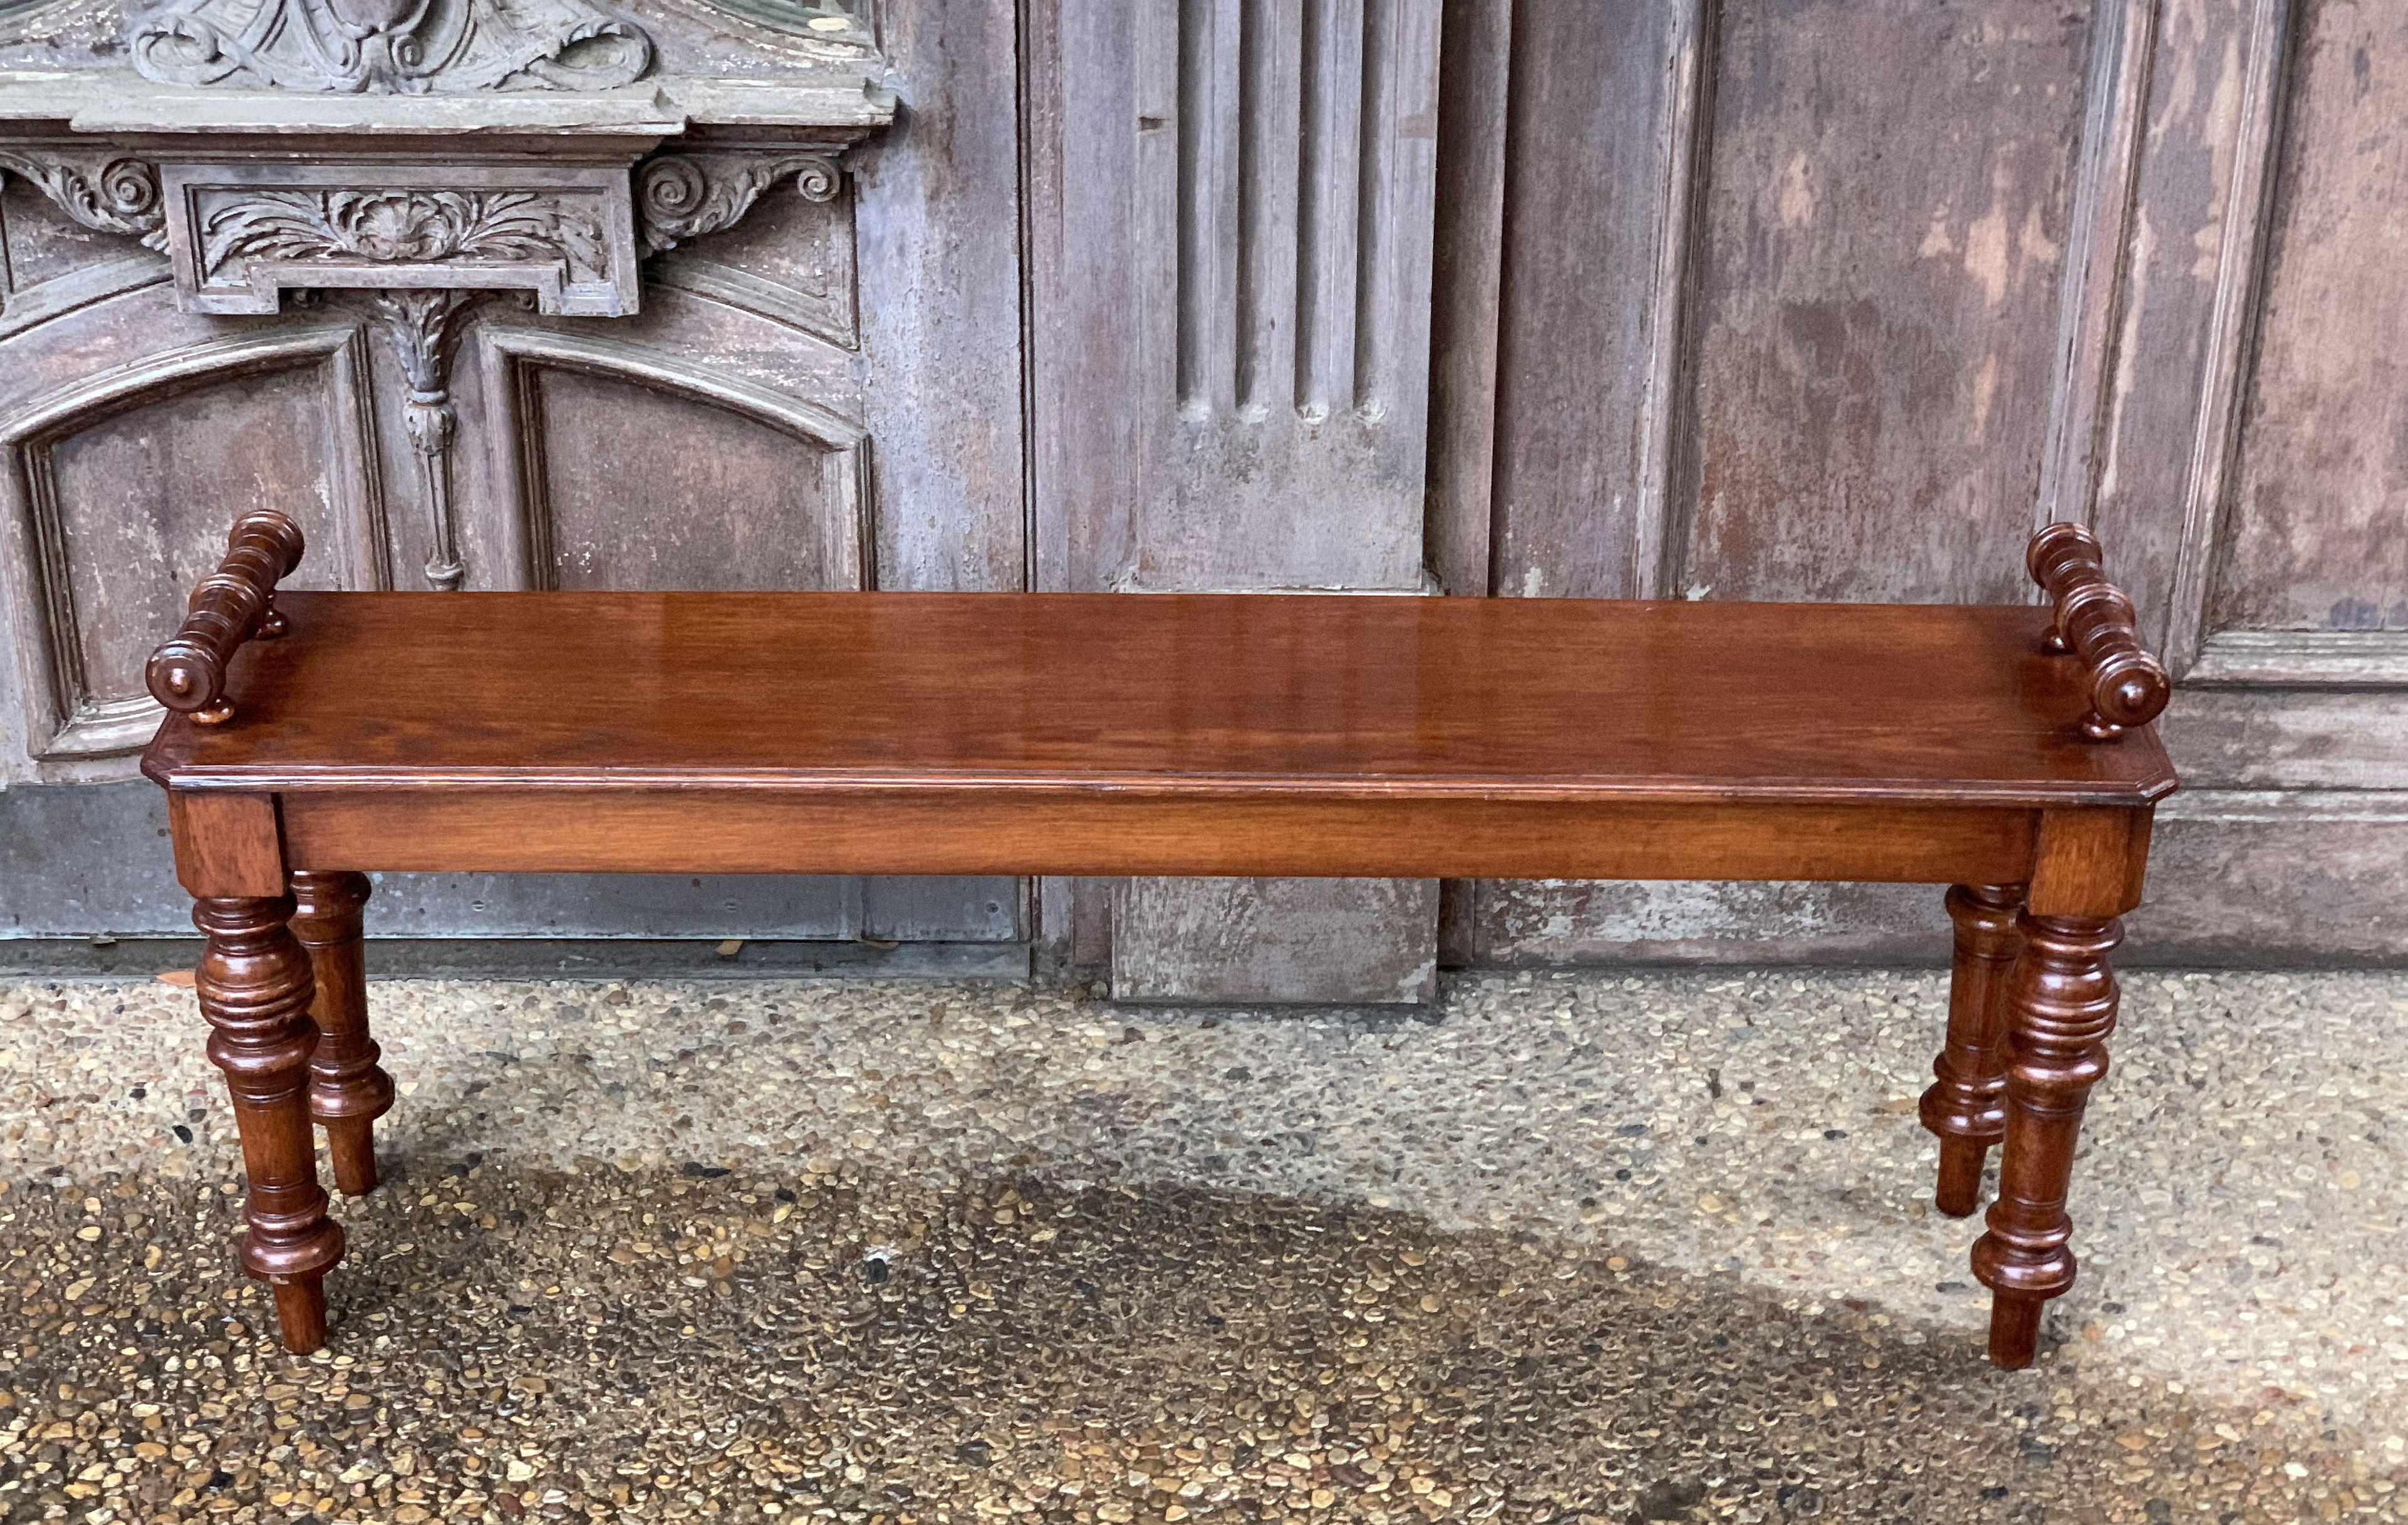 A fine English hall bench or window seat of oak, featuring turned handles at opposing ends over a long plank seat and set upon four turned legs.

Dimensions:

H 20 1/2 inches
W 48 inches
D 11 inches

Seat H 17 3/4 inches.



            